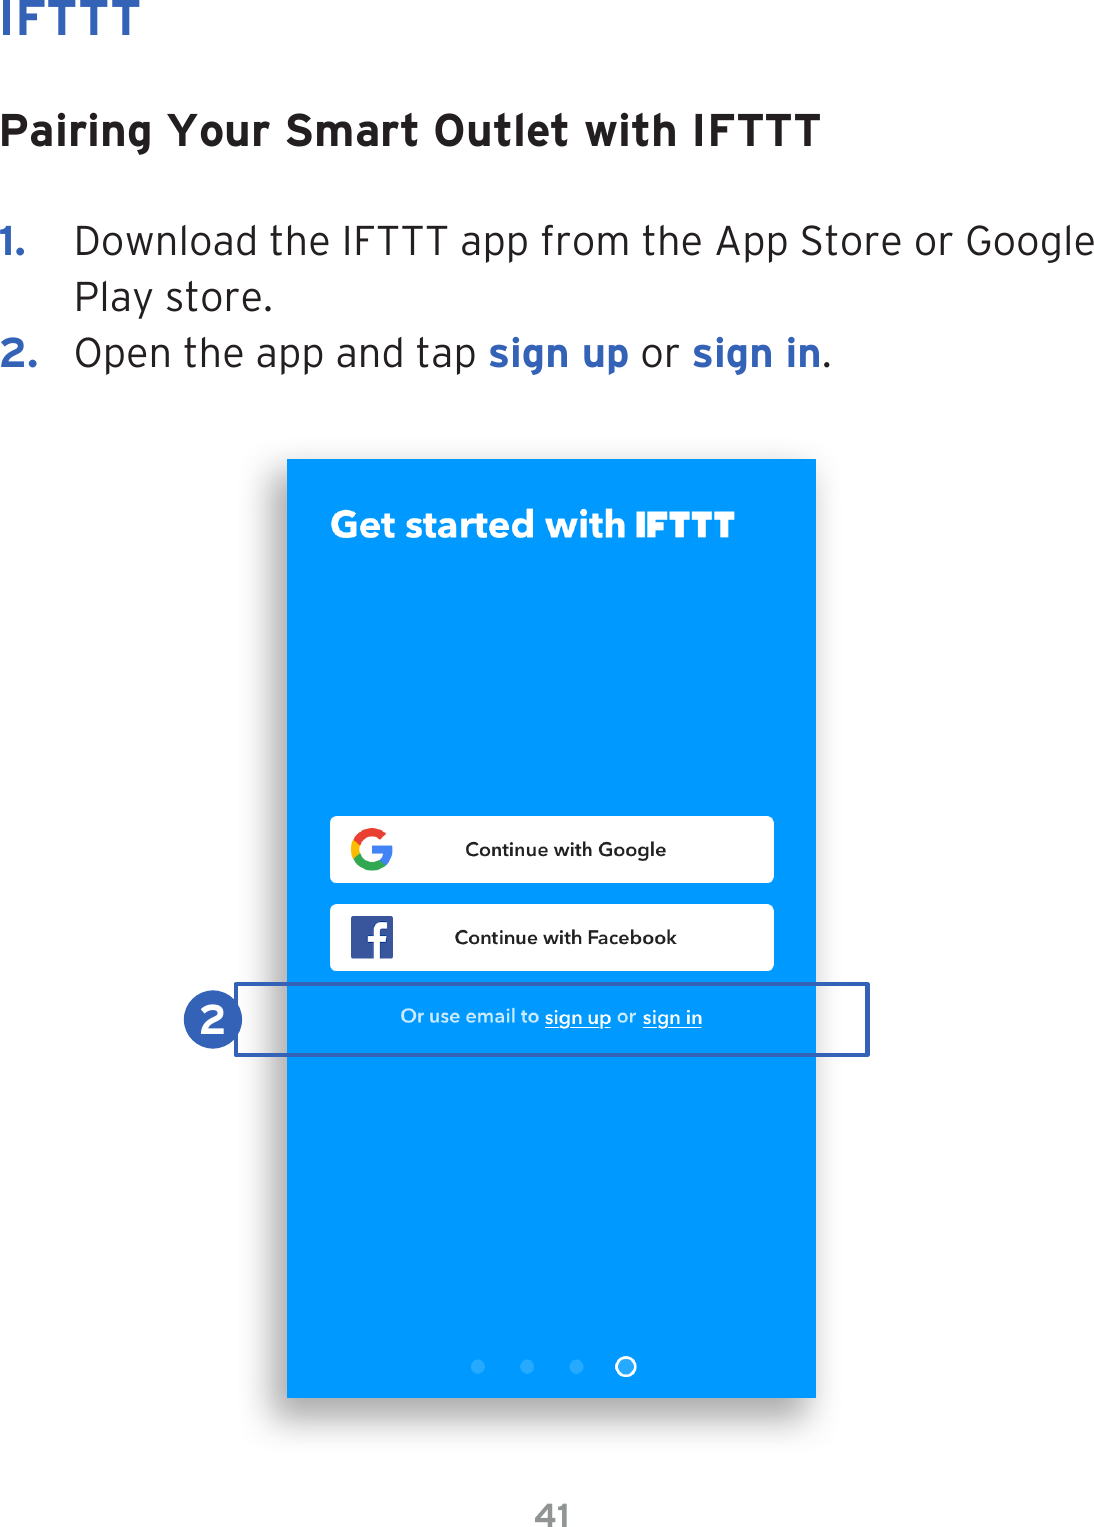 41IFTTTPairing Your Smart Outlet with IFTTT1.  Download the IFTTT app from the App Store or Google Play store.2.  Open the app and tap sign up or sign in.2